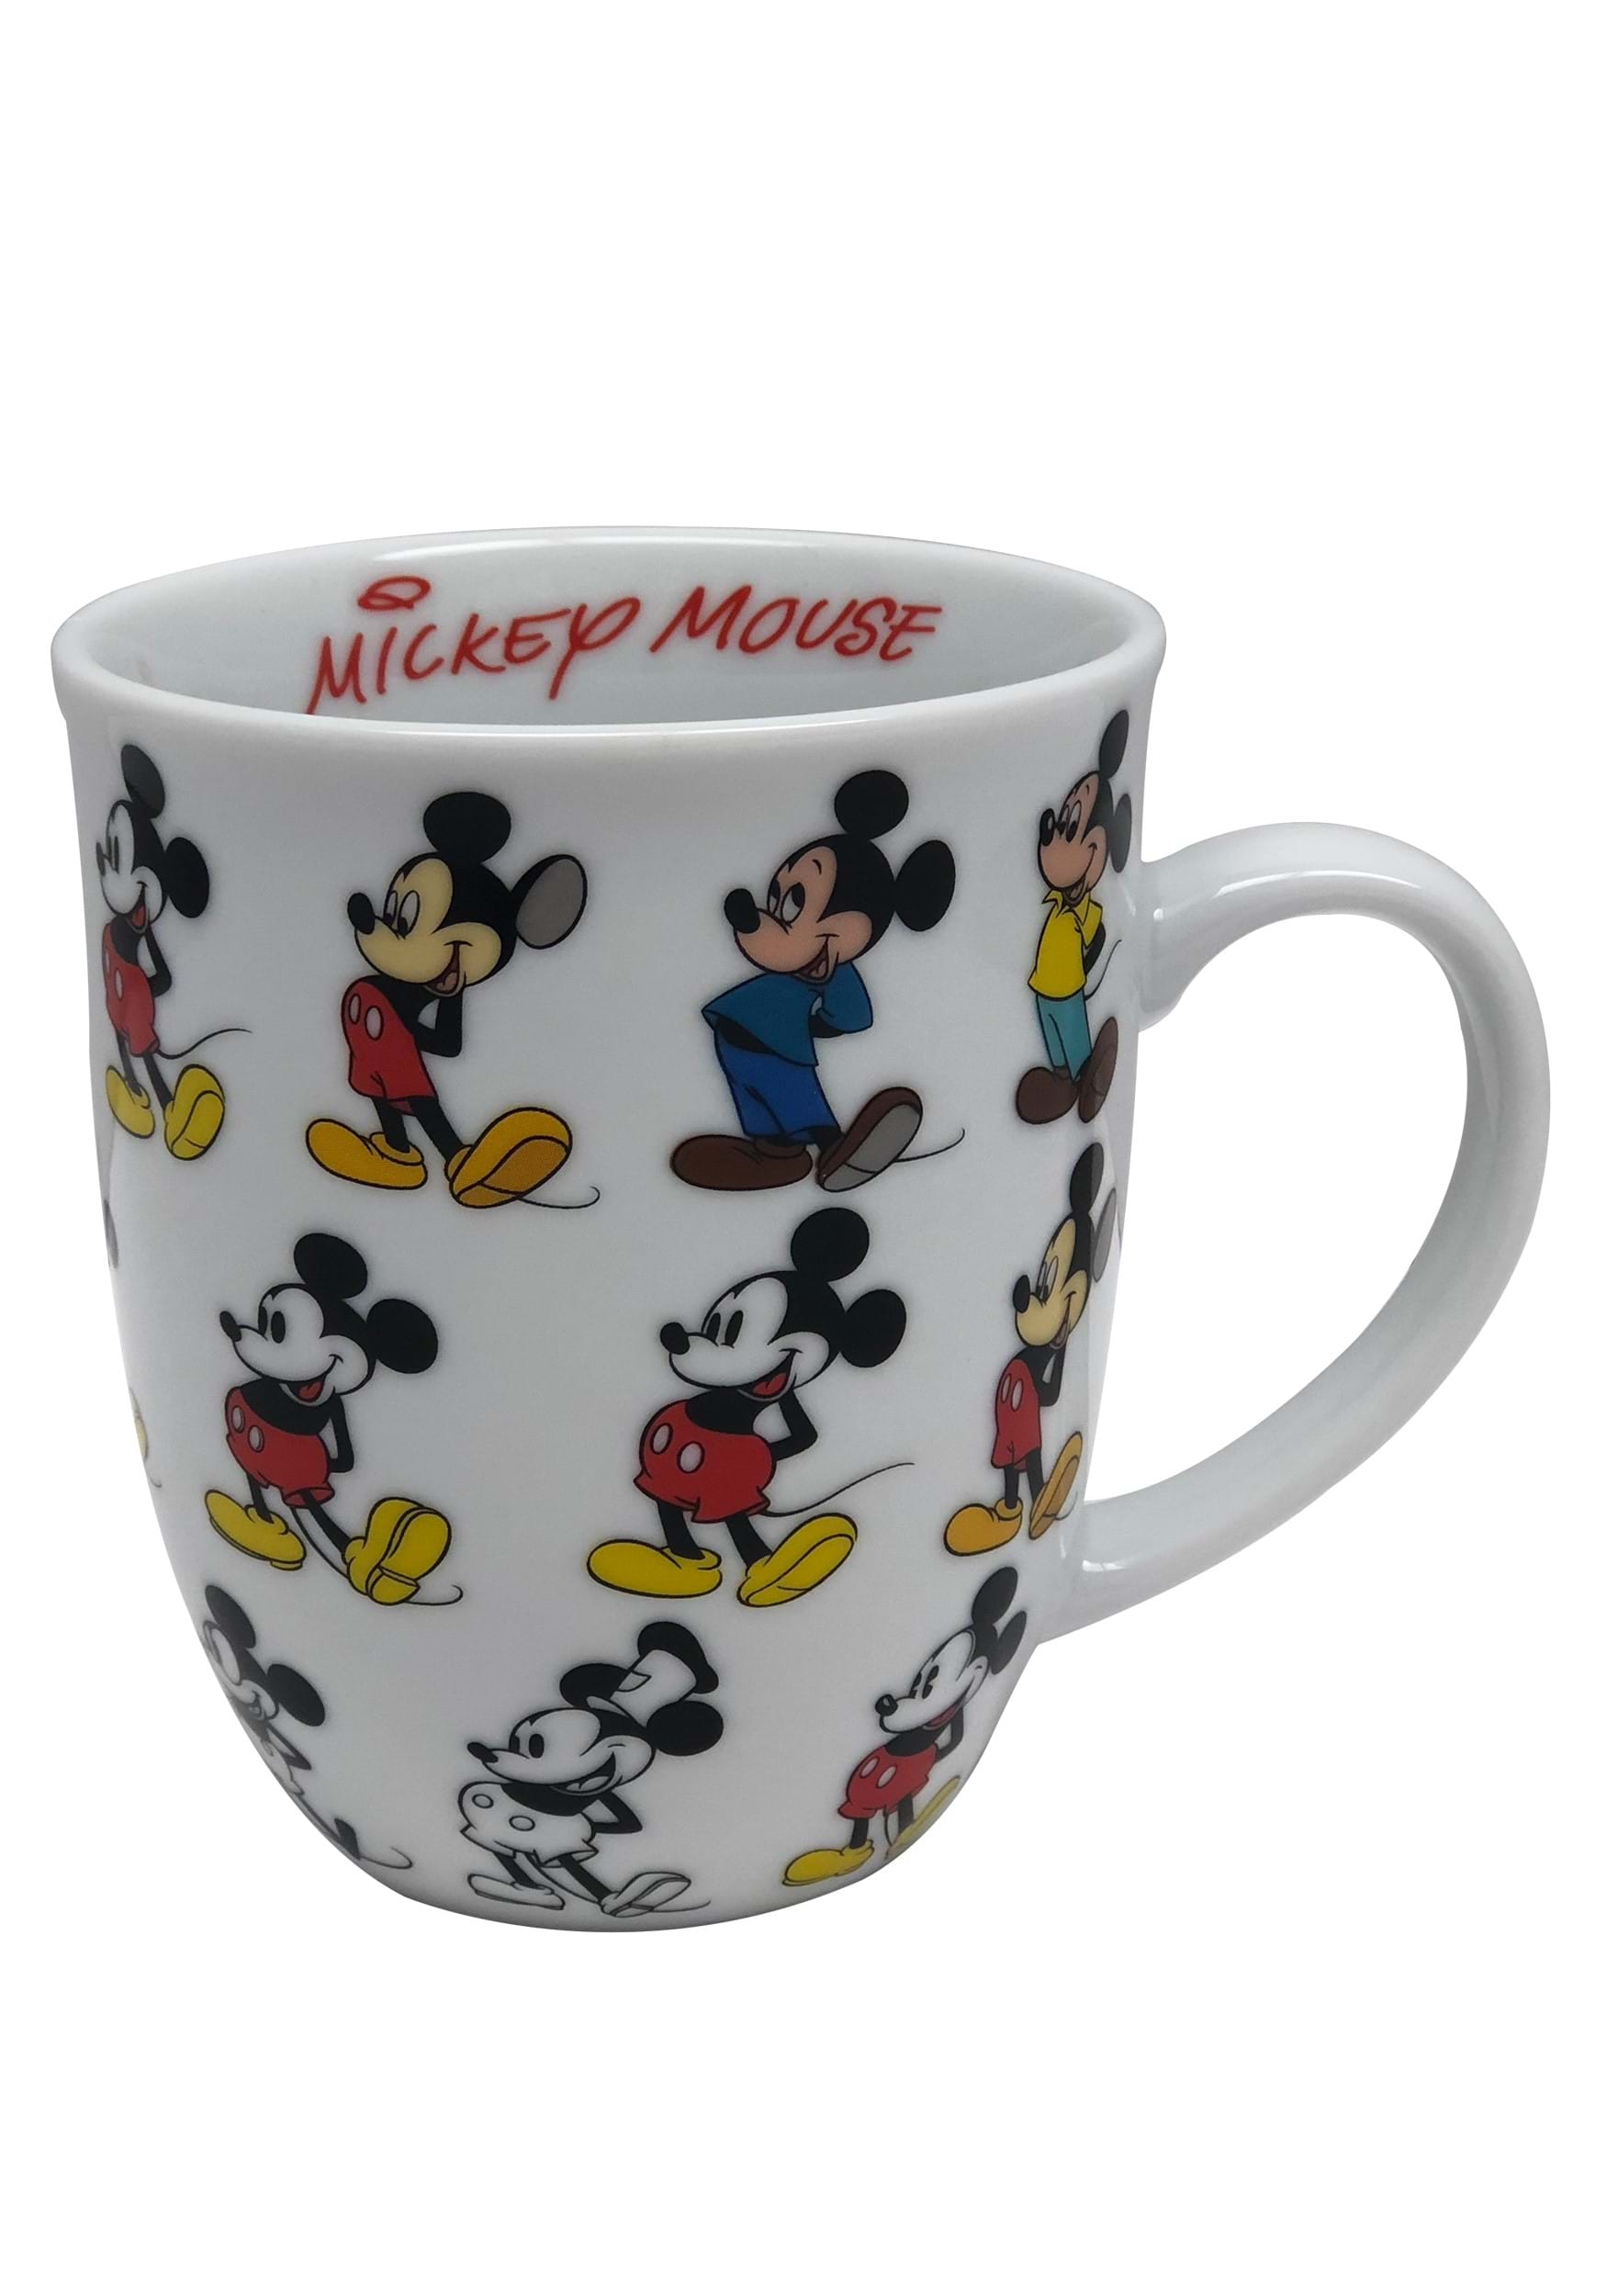 https://images.fun.com/products/84038/1-1/mickey-mouse-evolution-mug.jpg